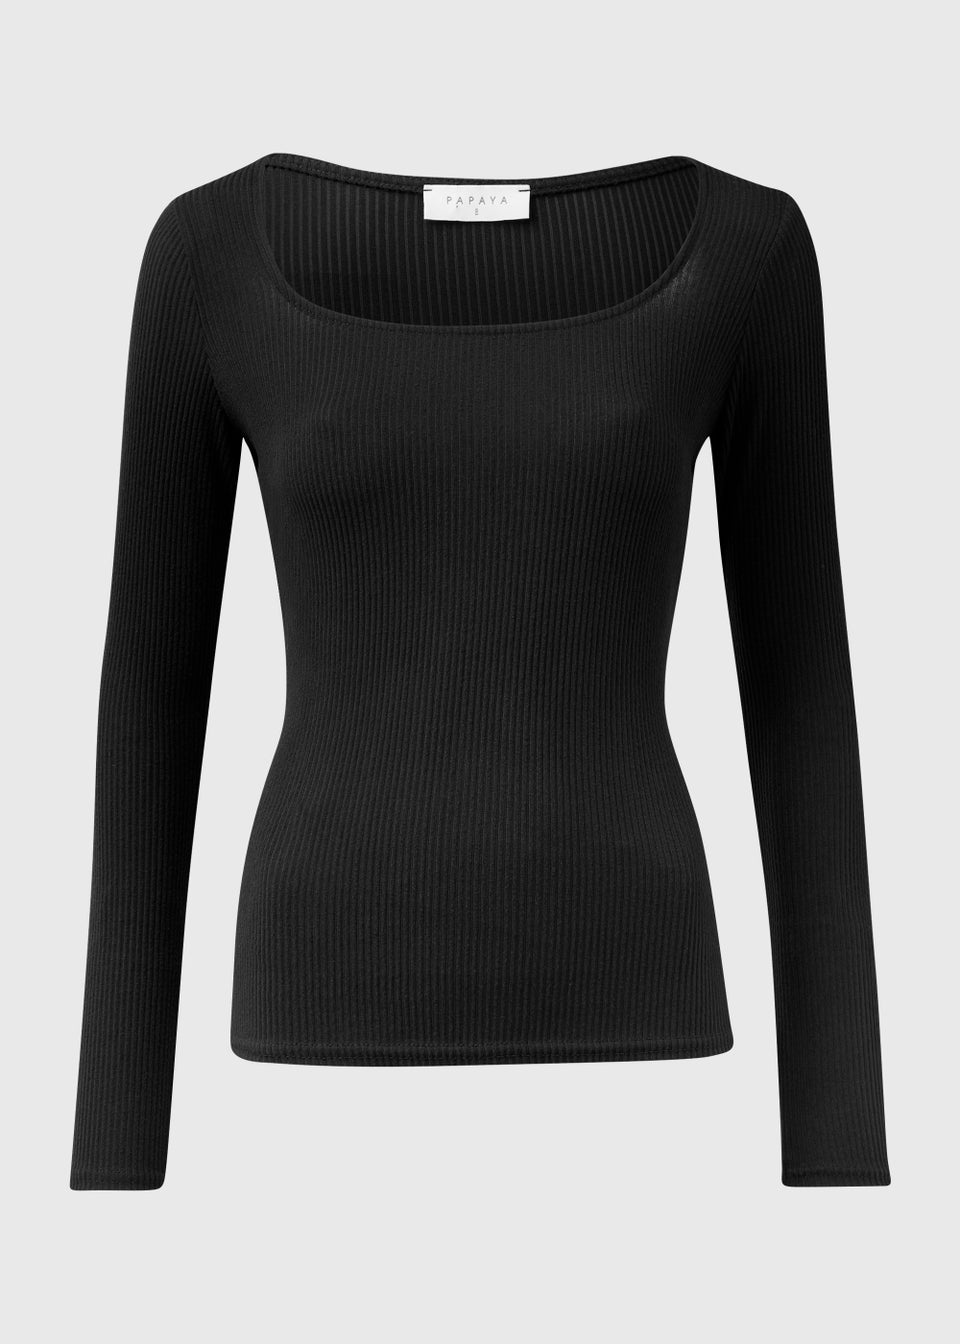 Black Square Neck Ribbed Long Sleeve Top